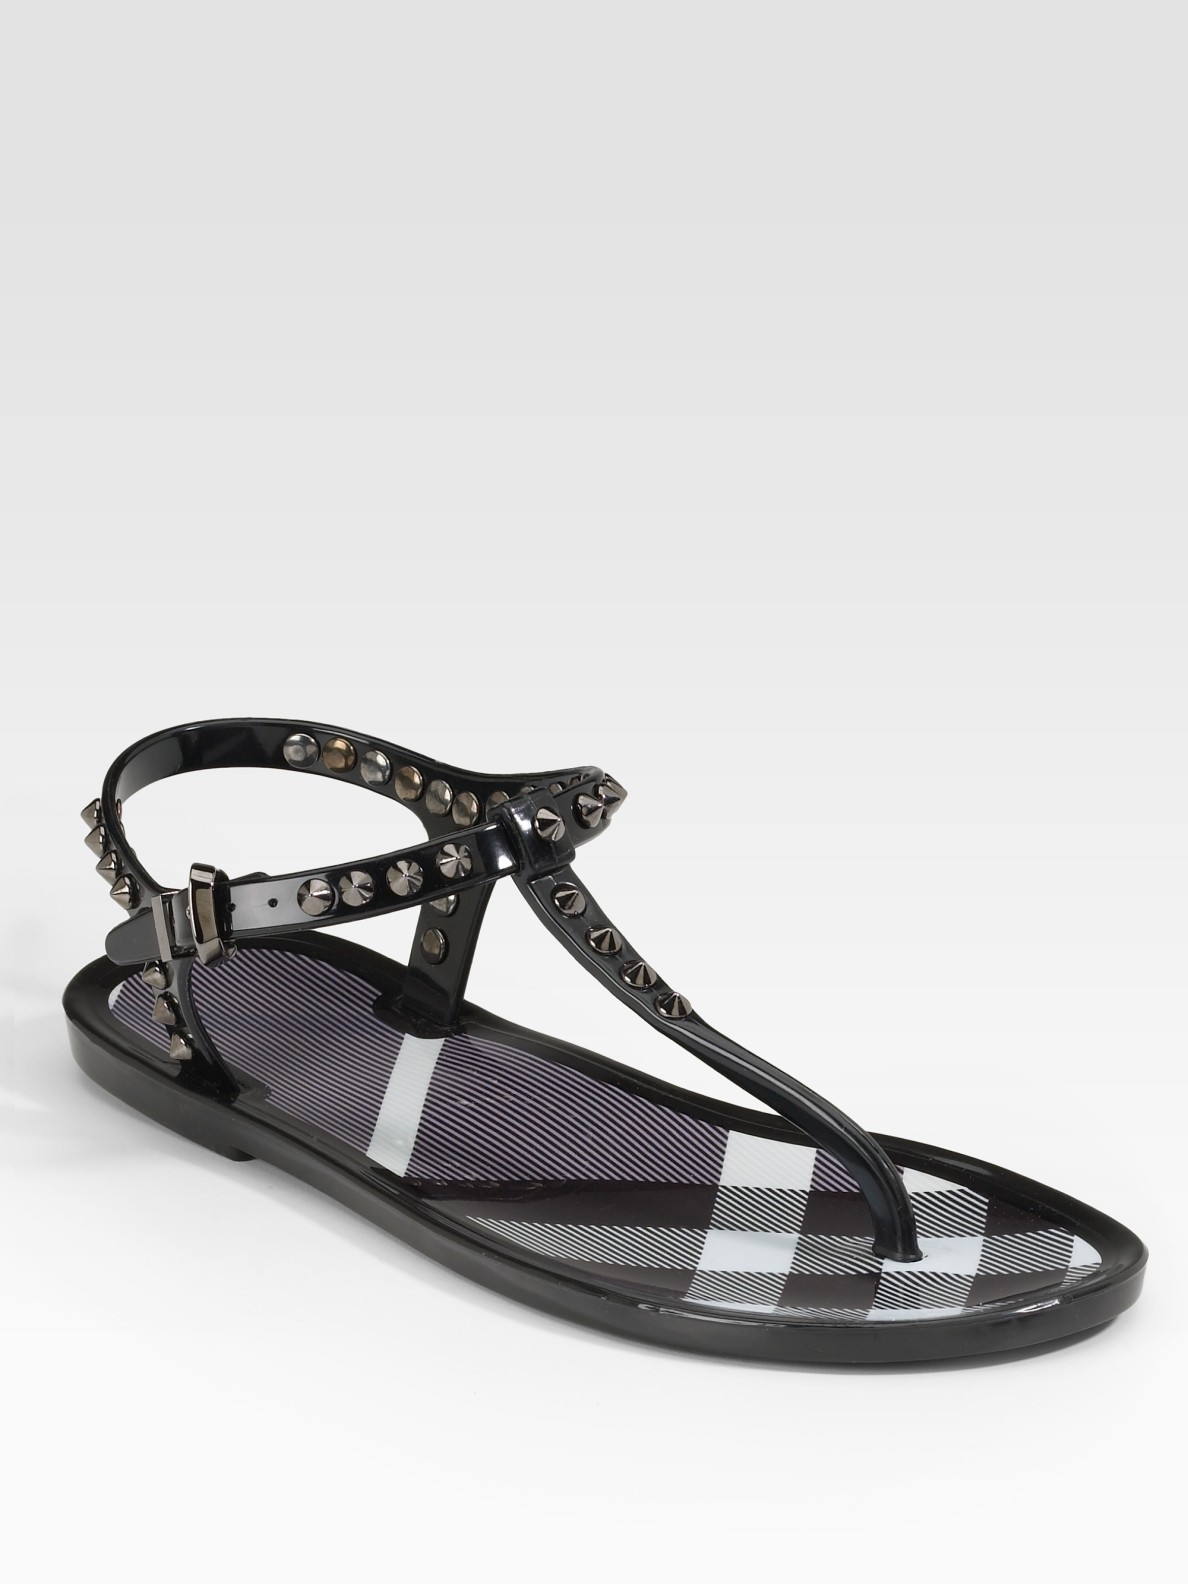 Lyst - Burberry Jelly Thong Sandals in Black